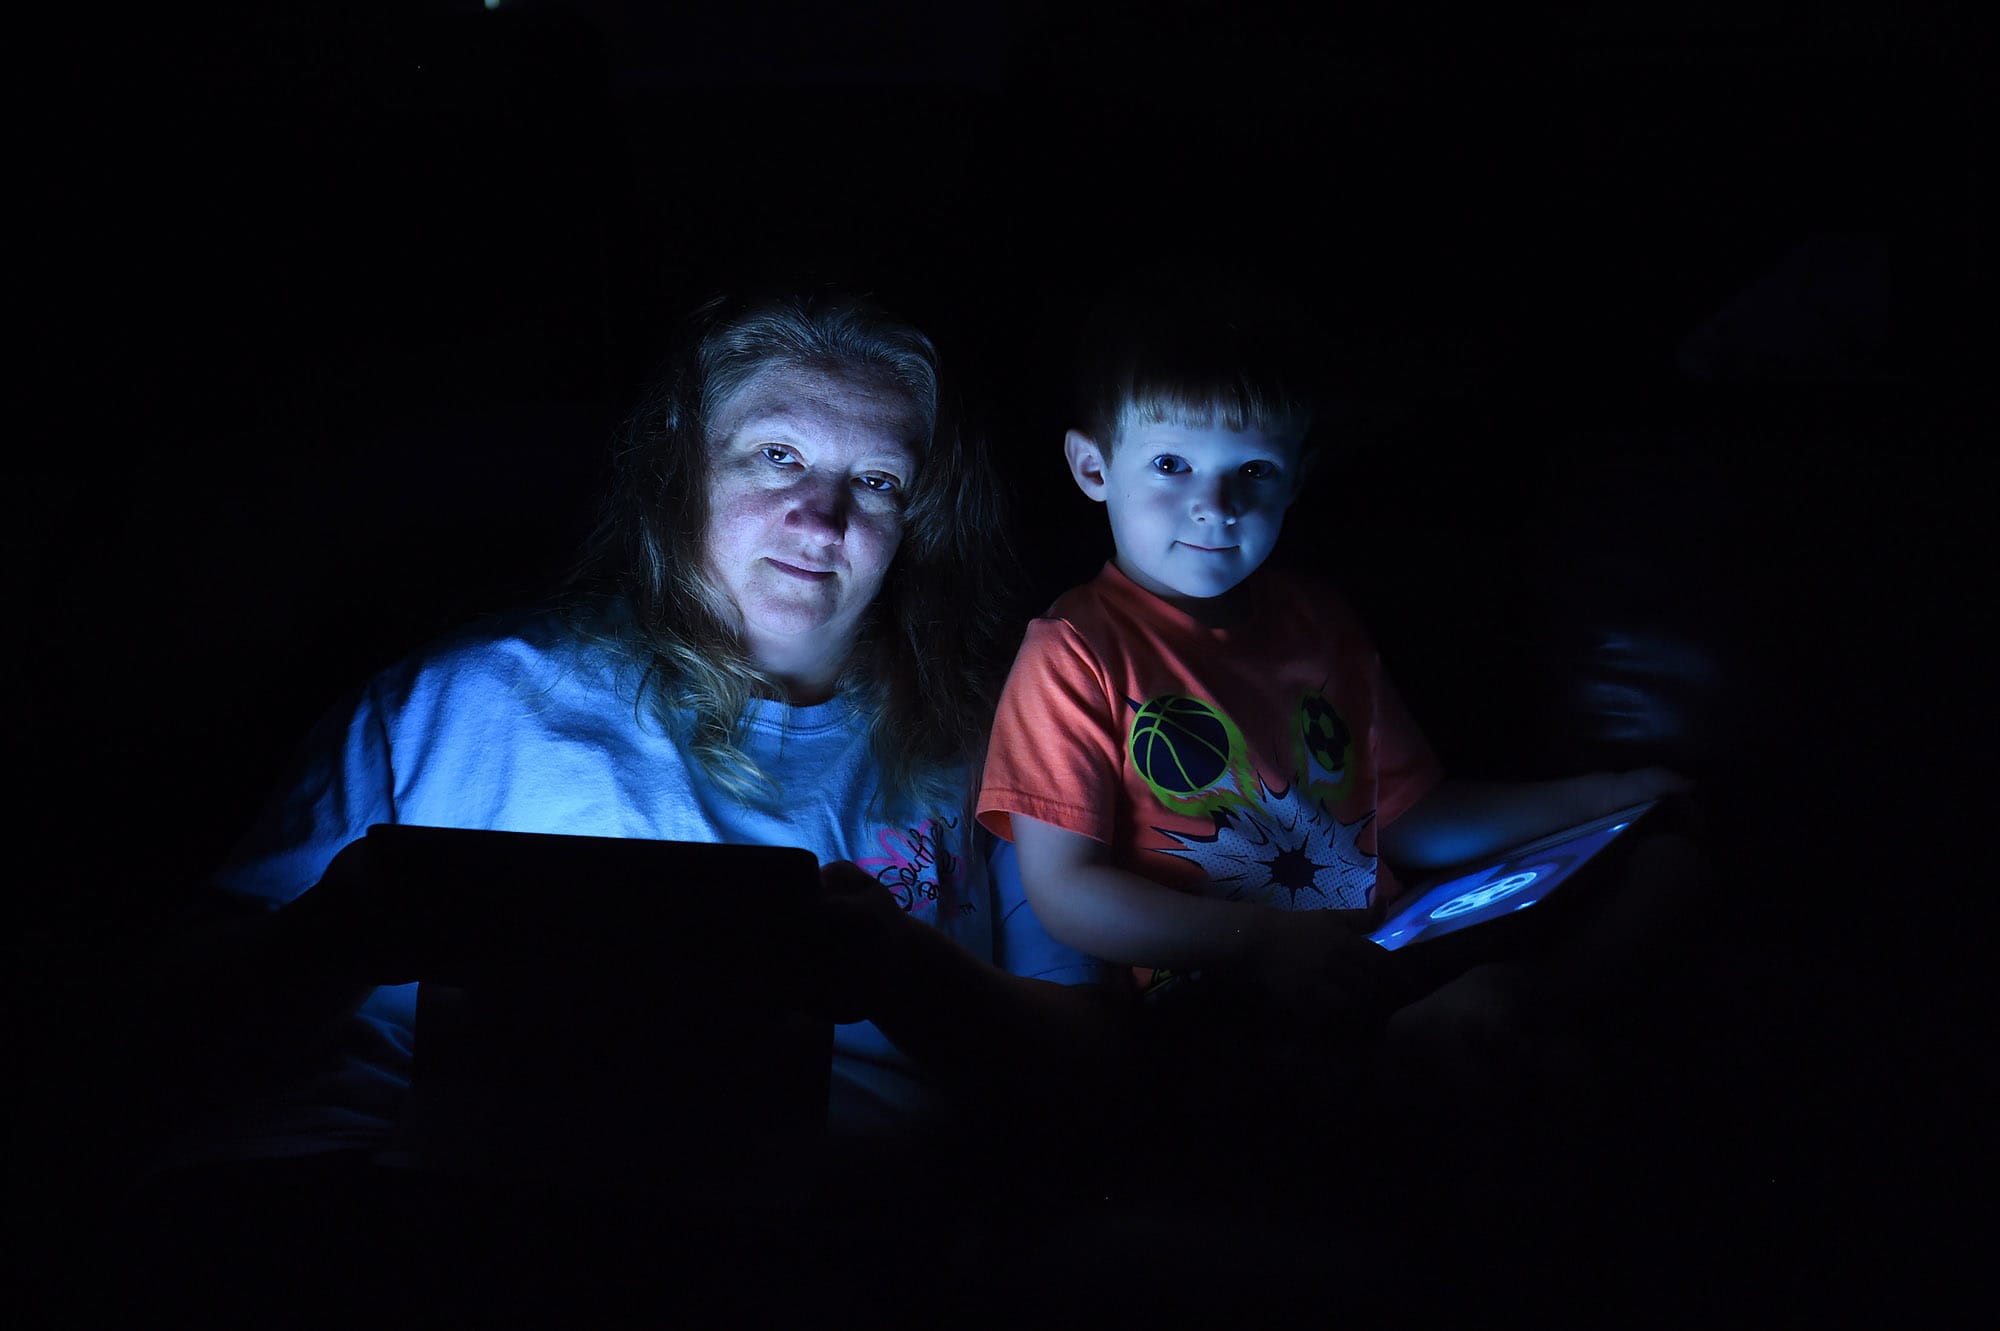 Cassie Lauterette and her son, Ashton, 4, are illuminated by the glow of the tablets that control many of their home&iacute;s functions. Illustrates SMARTHOMES (category l), by Audrey Hoffer, special to The Washington Post. Moved Monday, August 31, 2015.